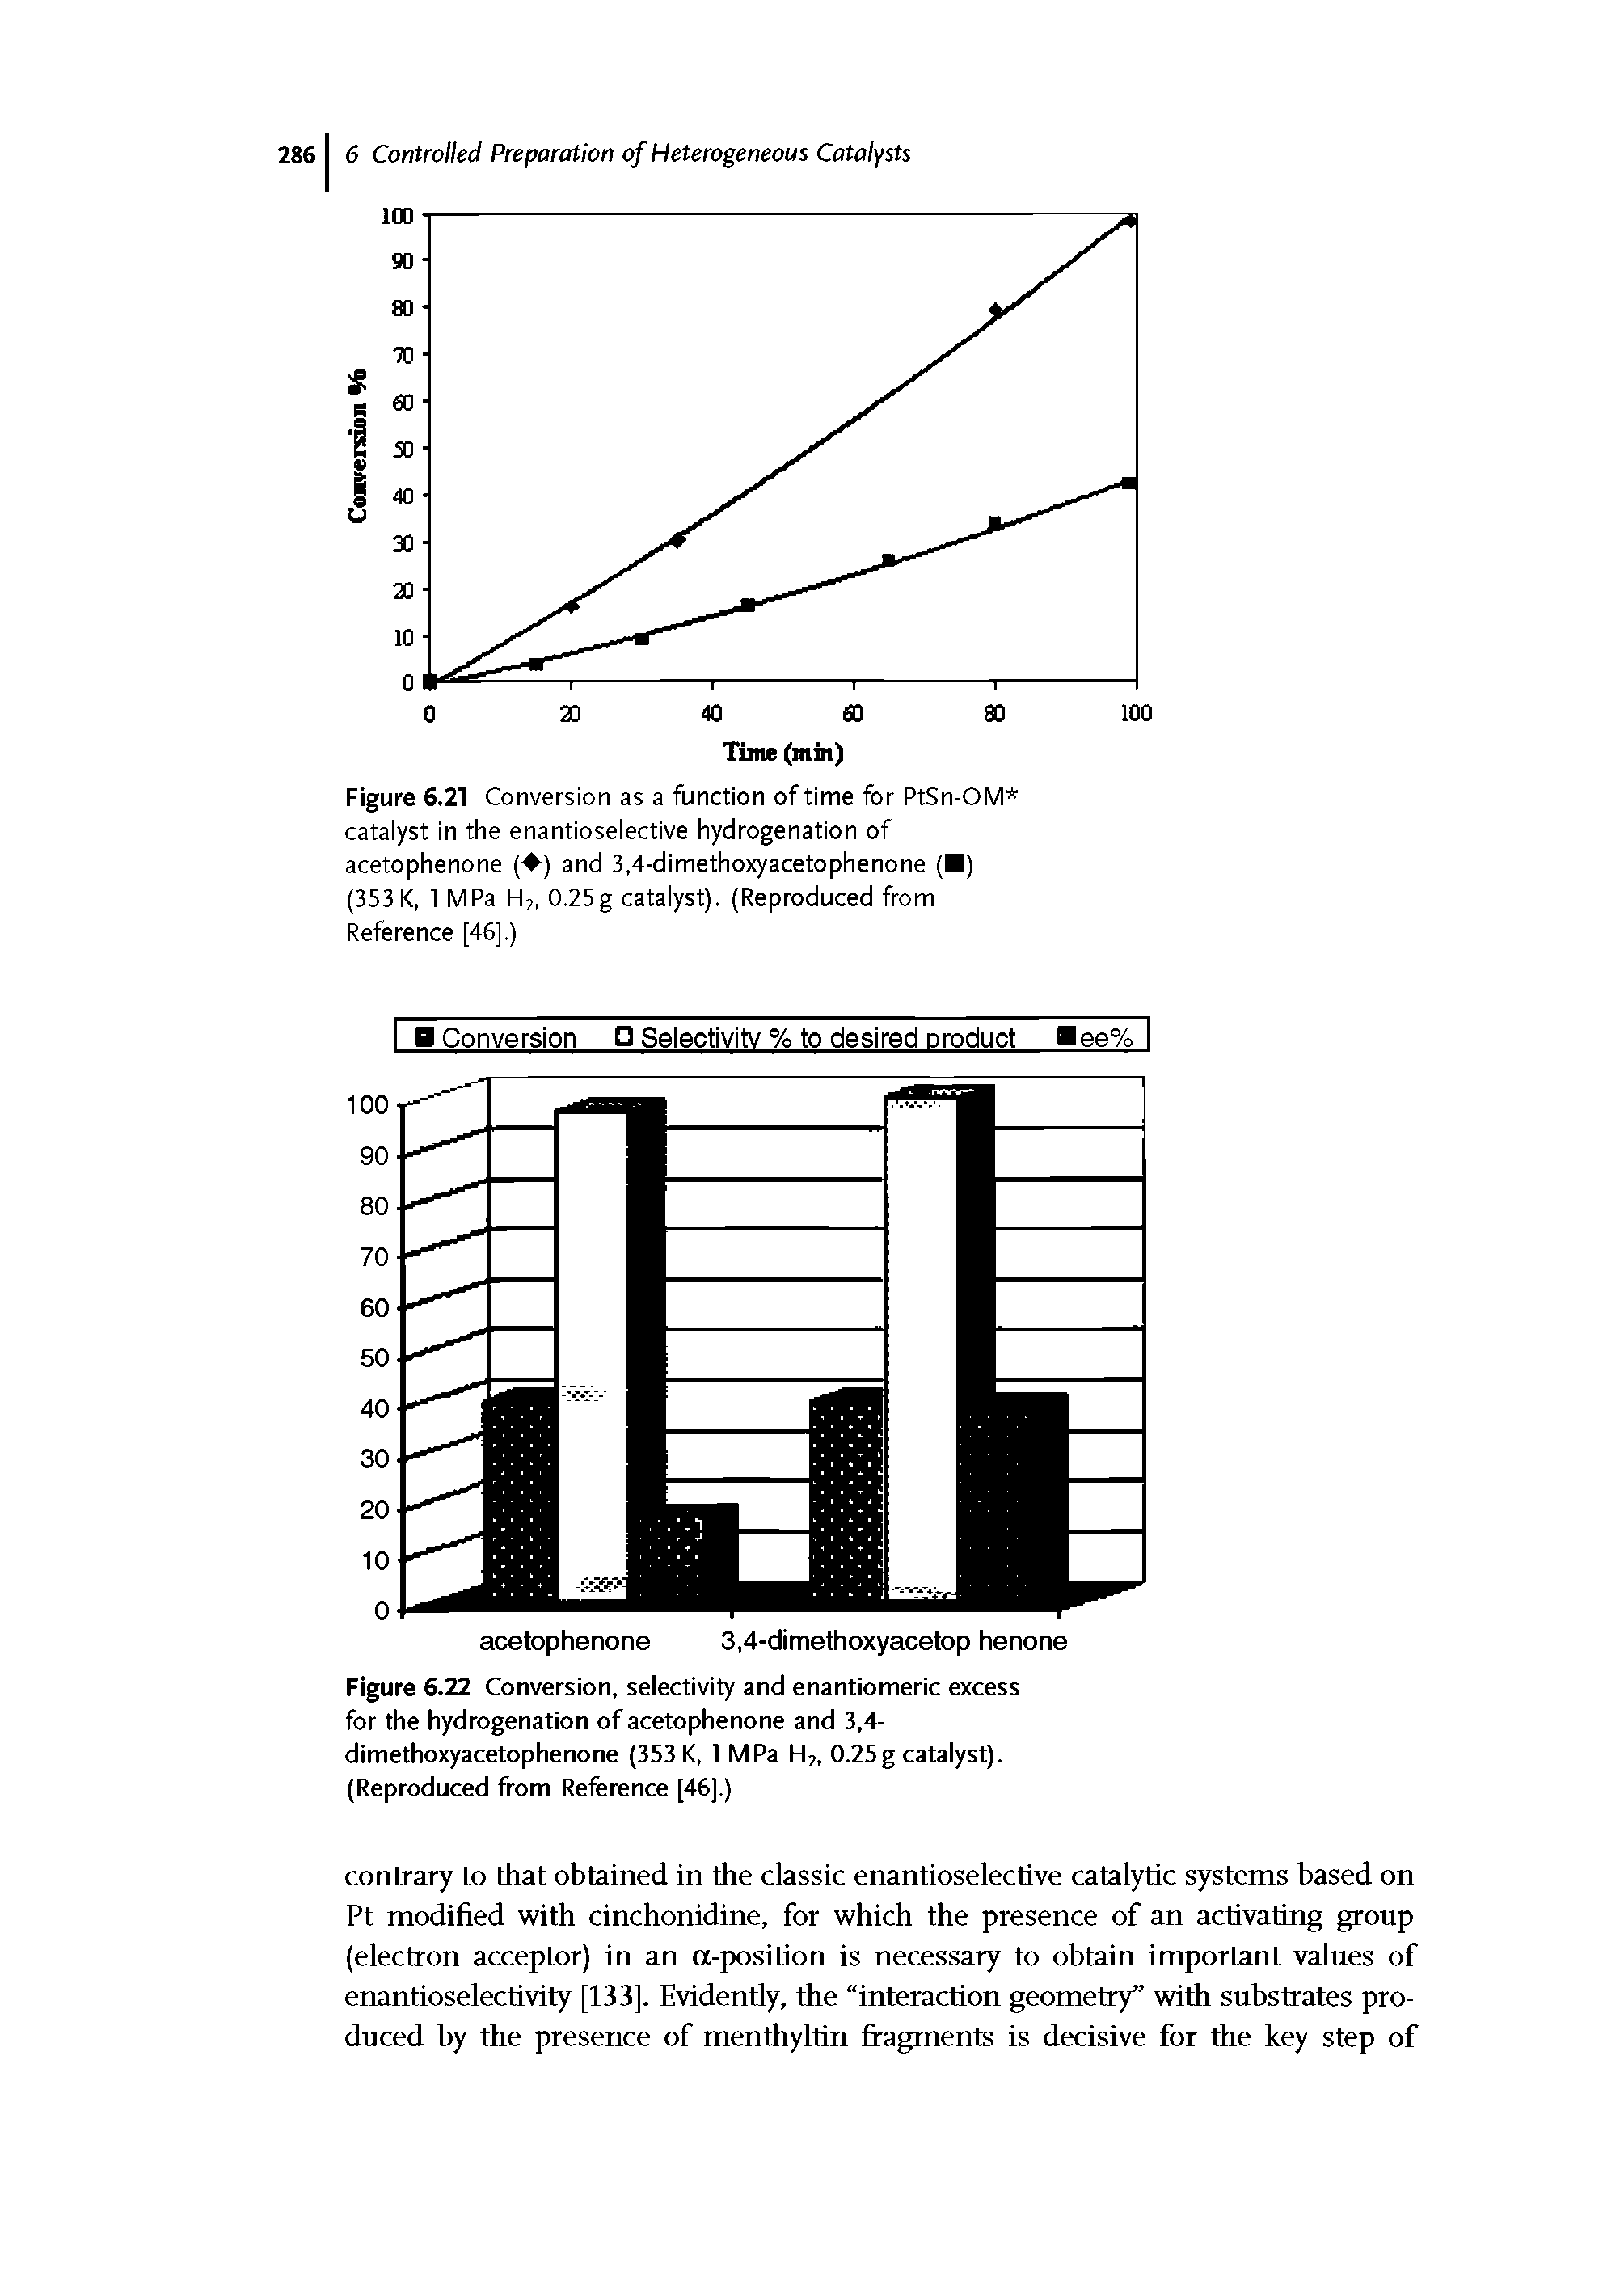 Figure 6.21 Conversion as a function of time for PtSn-OM catalyst in the enantioselective hydrogenation of acetophenone ( ) and 3,4-dimethoxyacetophenone ( ) (353 K, 1 MPa H2, 0.25g catalyst). (Reproduced from Reference [46].)...